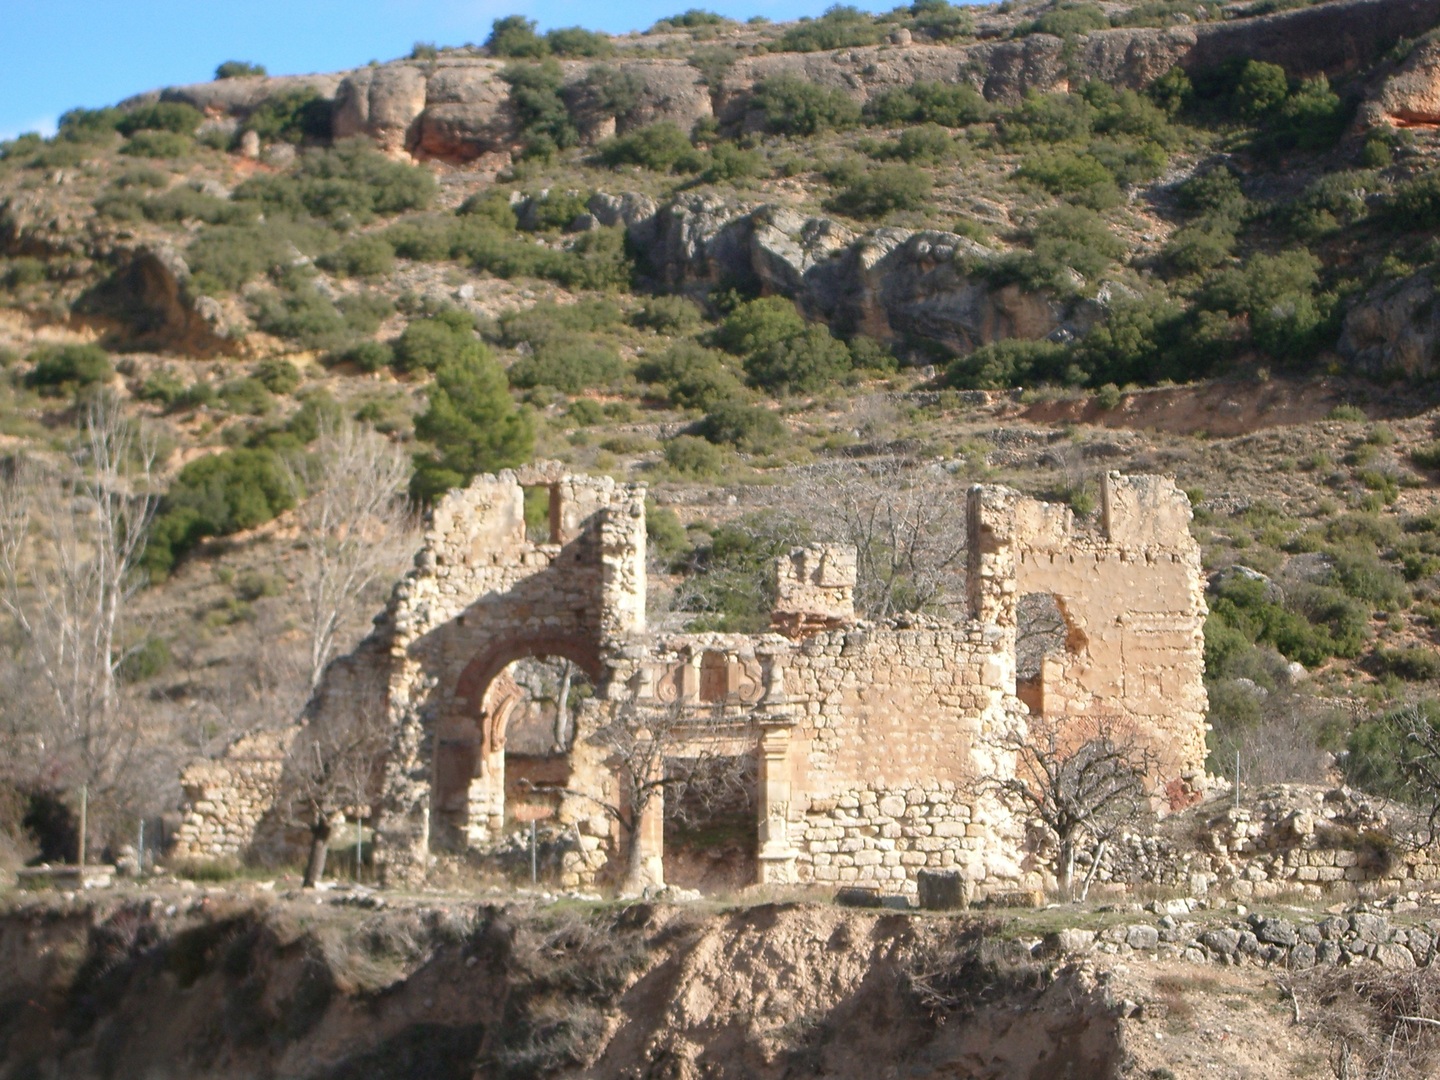 The ruins of San Guillermo convent